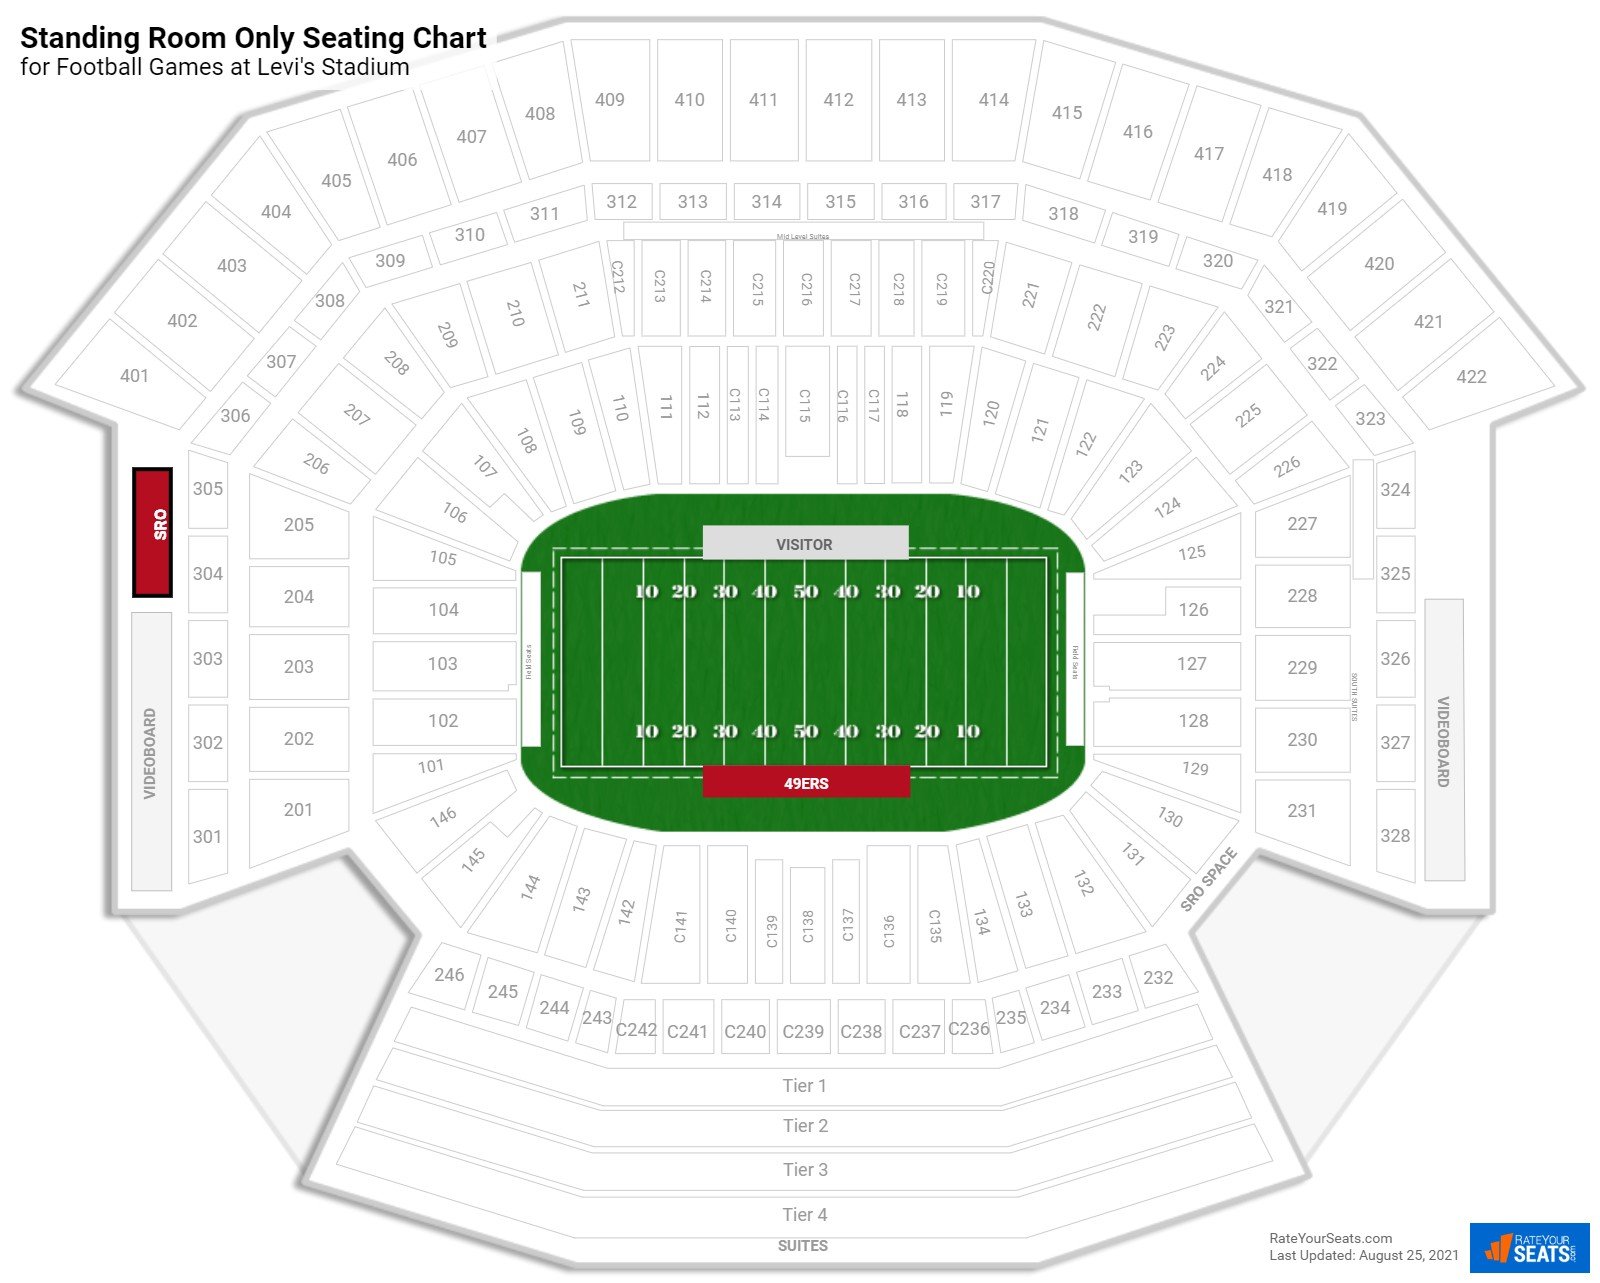 9ers tickets